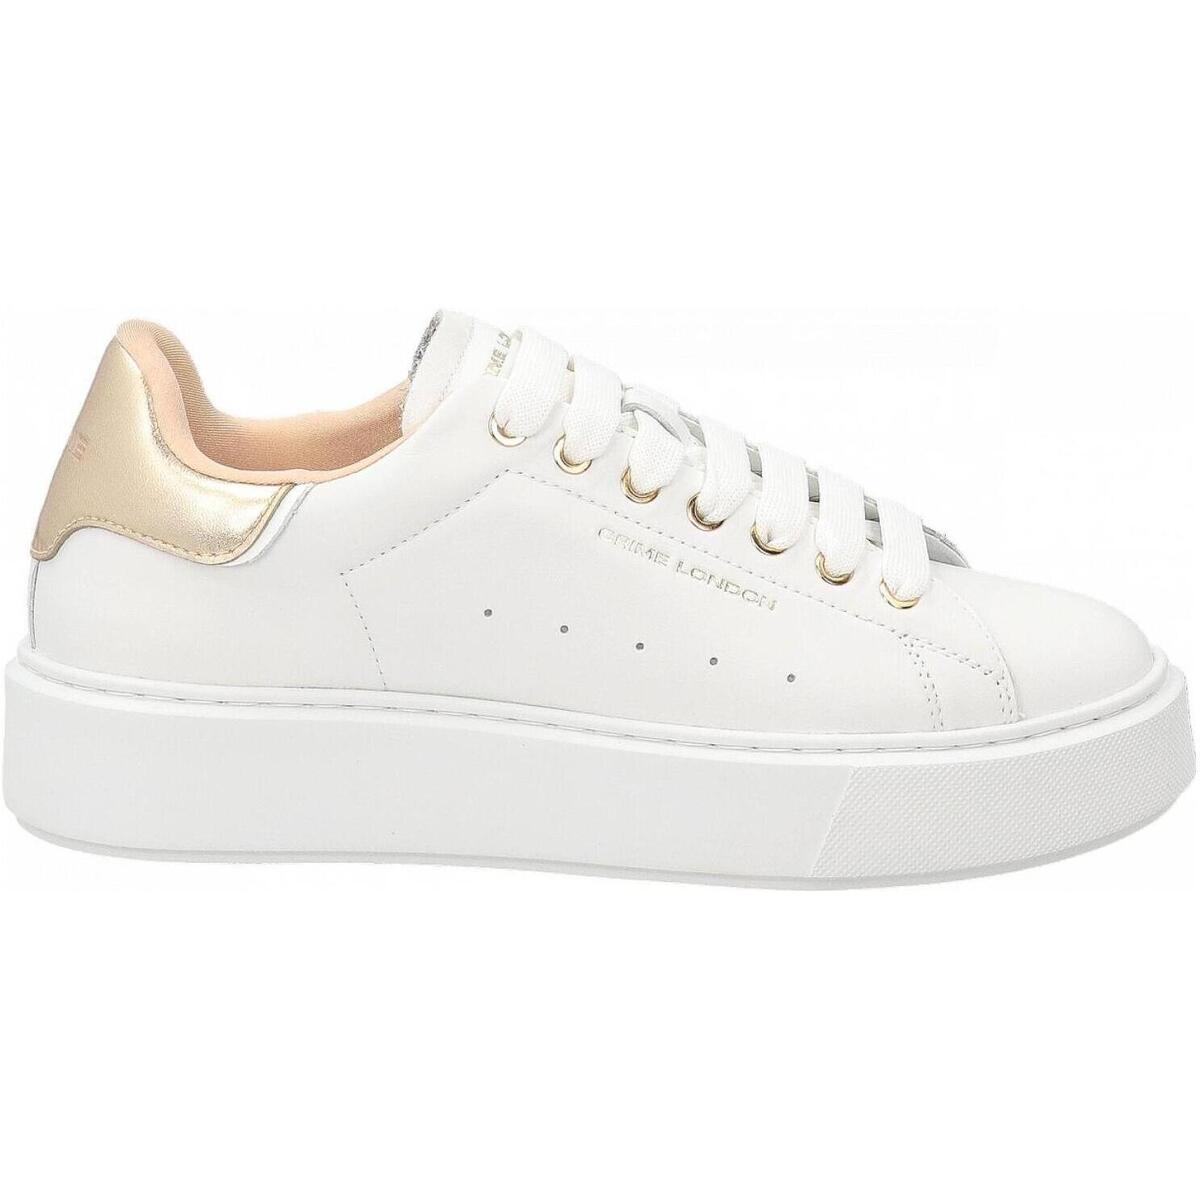 Chaussures Femme The Divine Facto EXTRALIGHT Blanc